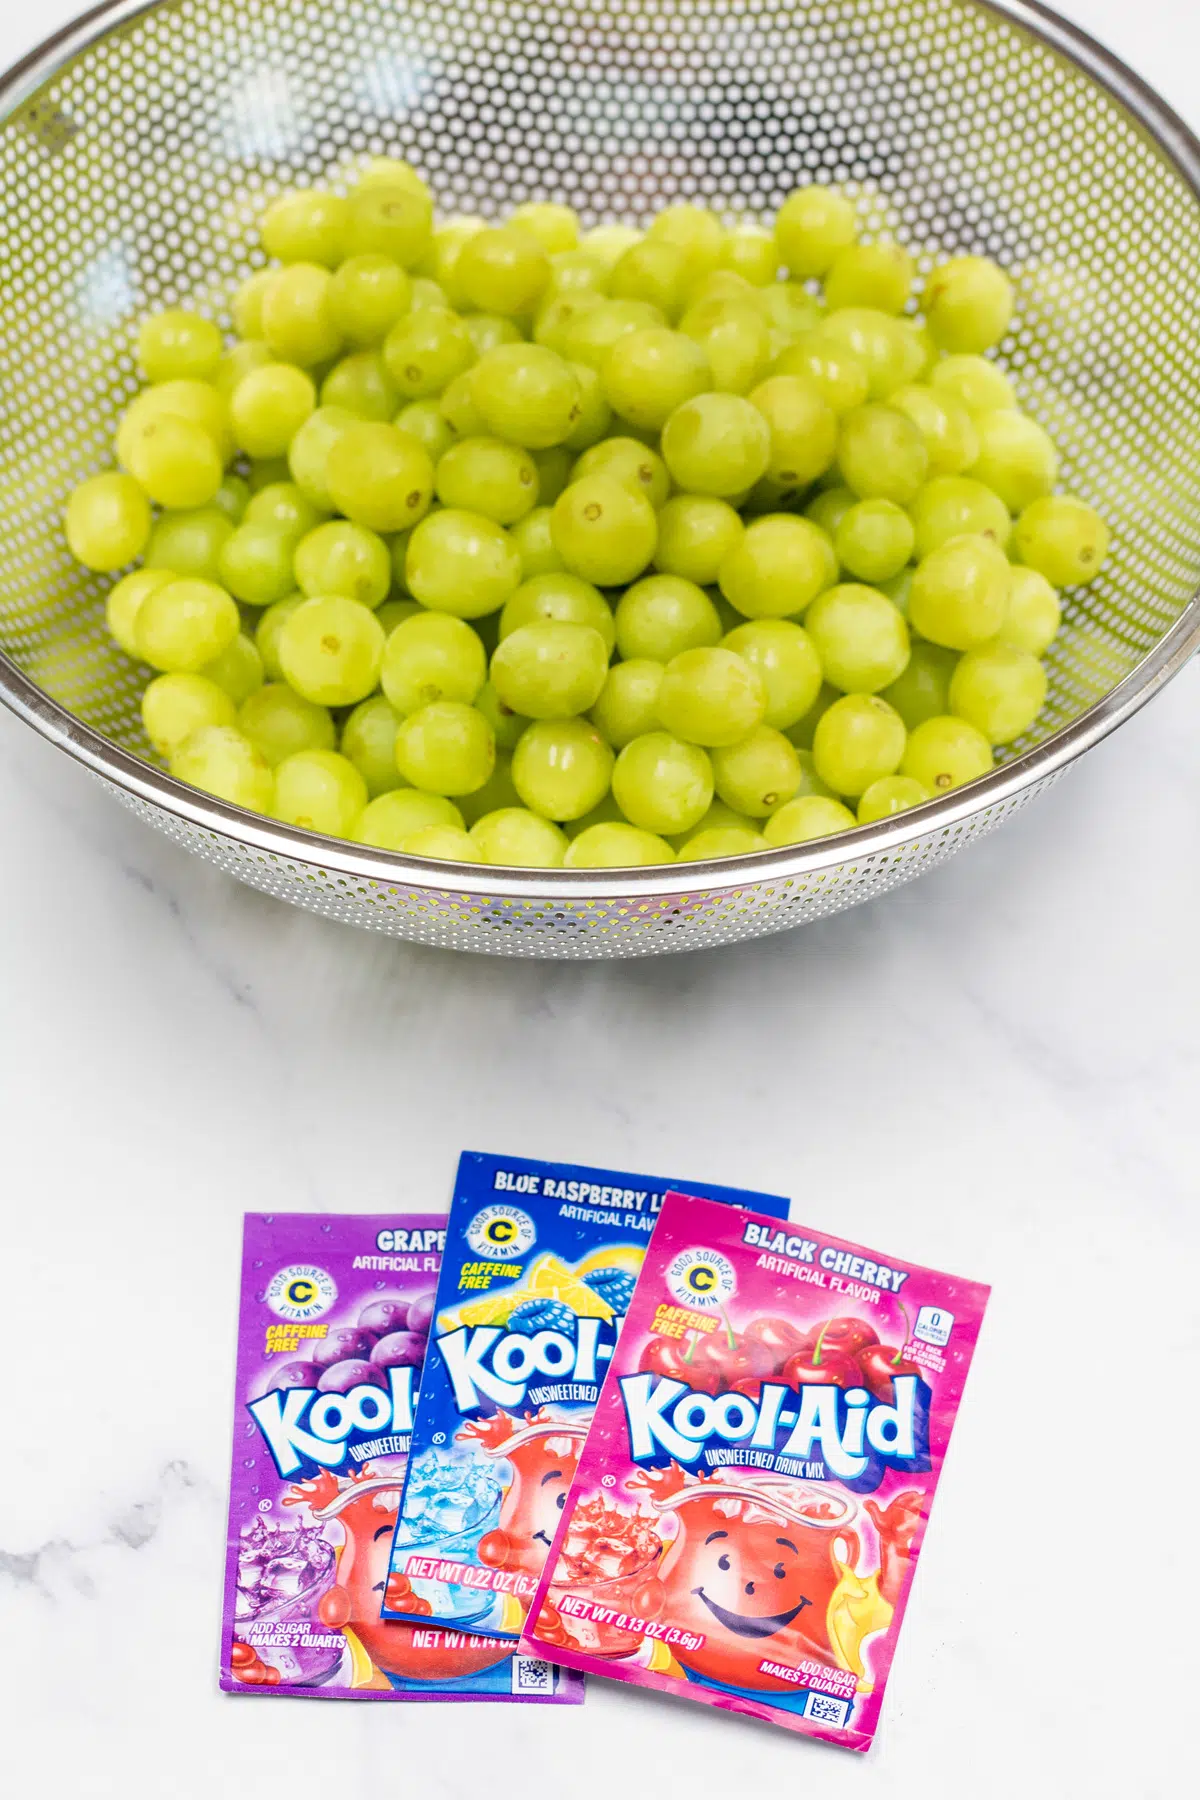 Kool-Aid grapes ingredients with 3 packets of koolaid flavors and a colander with green grapes.